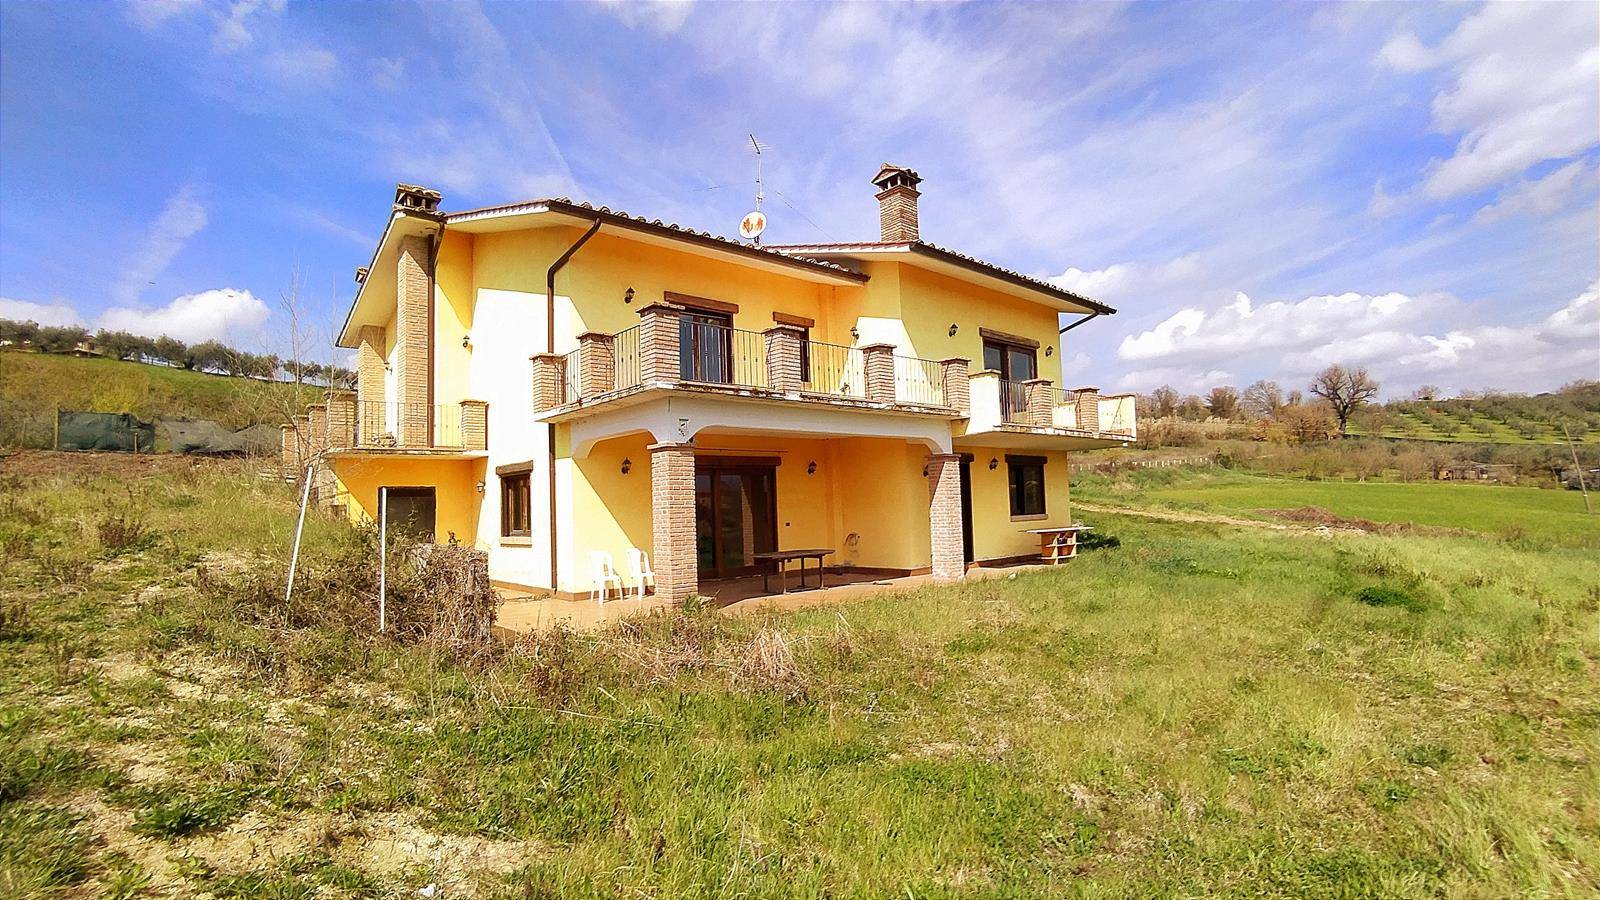 TARANO, Villa for sale of 314 Sq. mt., Good condition, Heating Individual heating system, Energetic class: F, placed at Ground, composed by: 8 Rooms, 